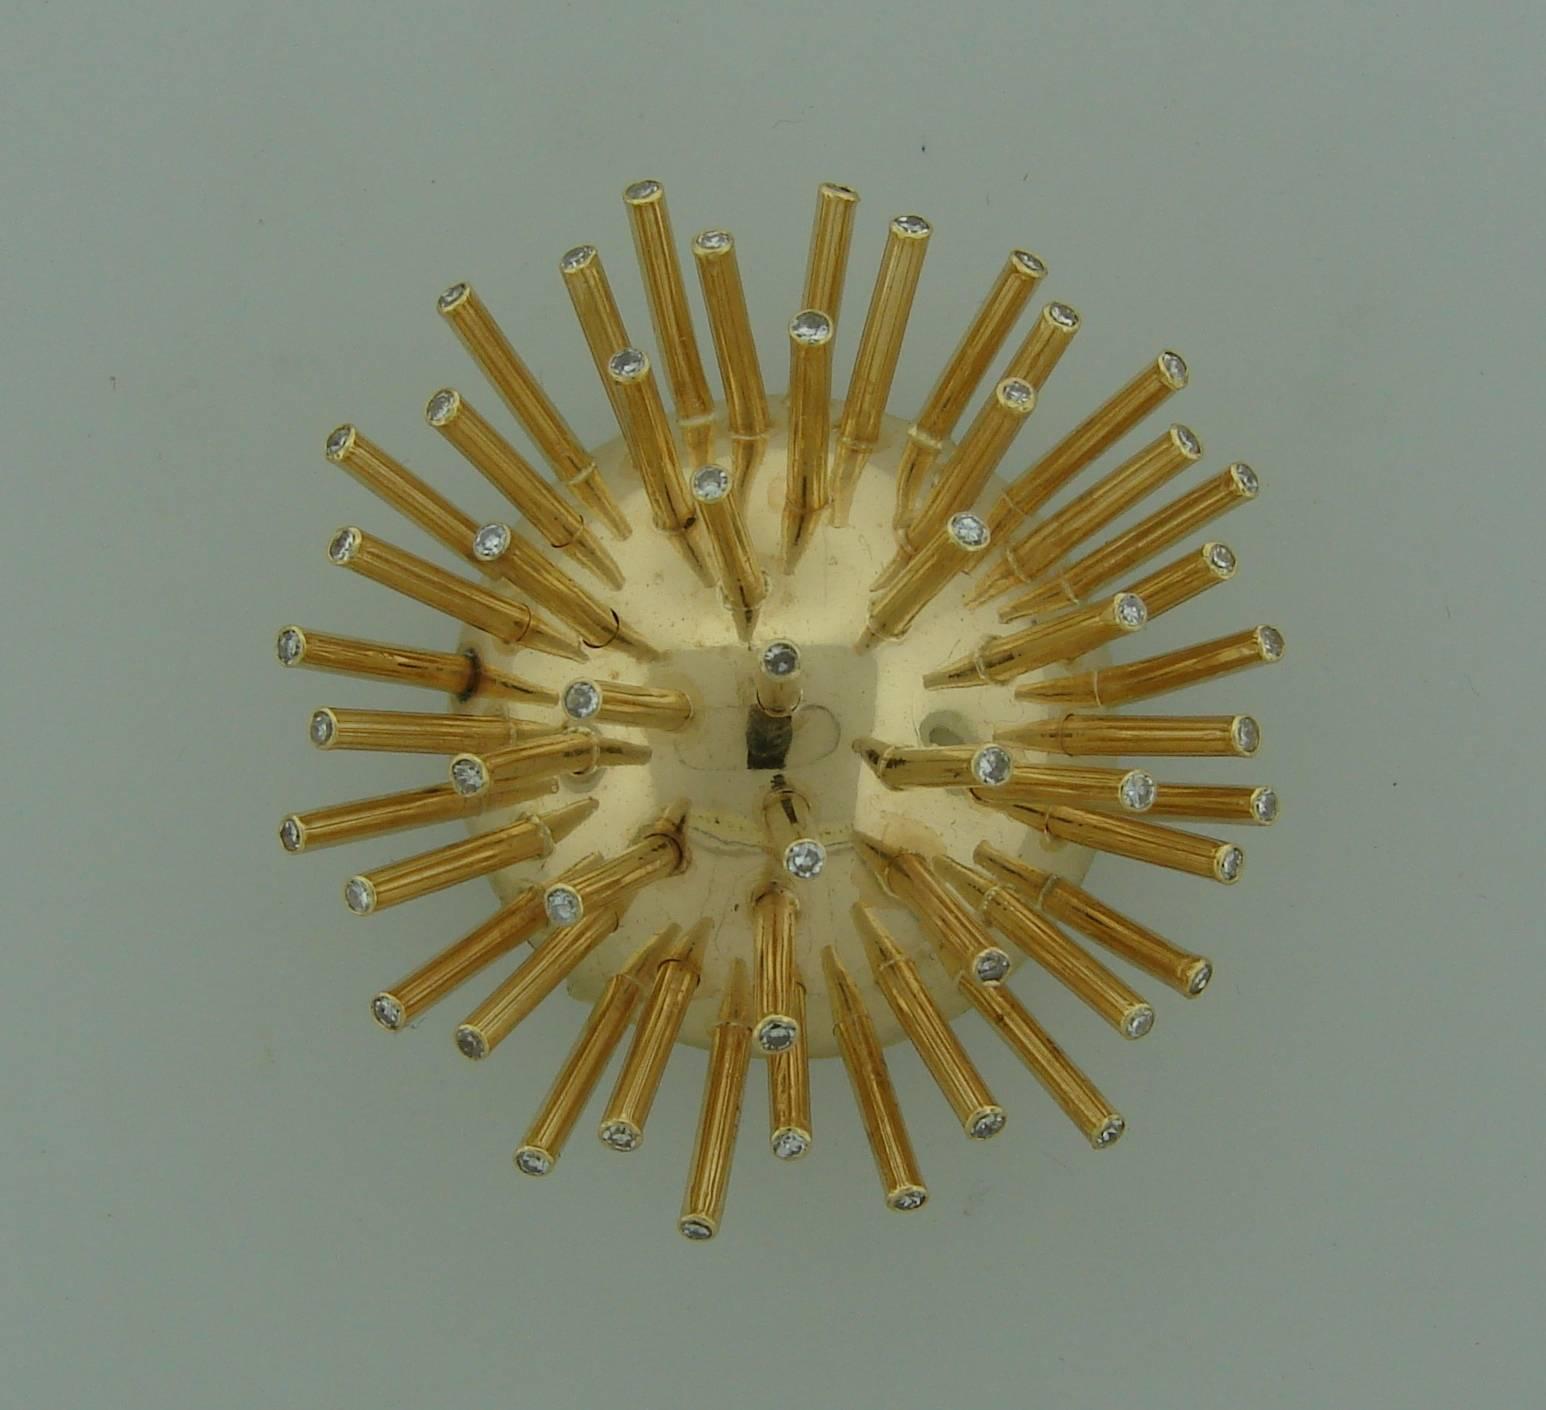 Elegant and fun Sputnik clip created by Cartier in the 1950's. Makes a chic accent to any outfit and is a great addition to your jewelry collection.
It is made of 14 karat yellow gold and single cut diamonds (total weight approximately 0.47 carat).